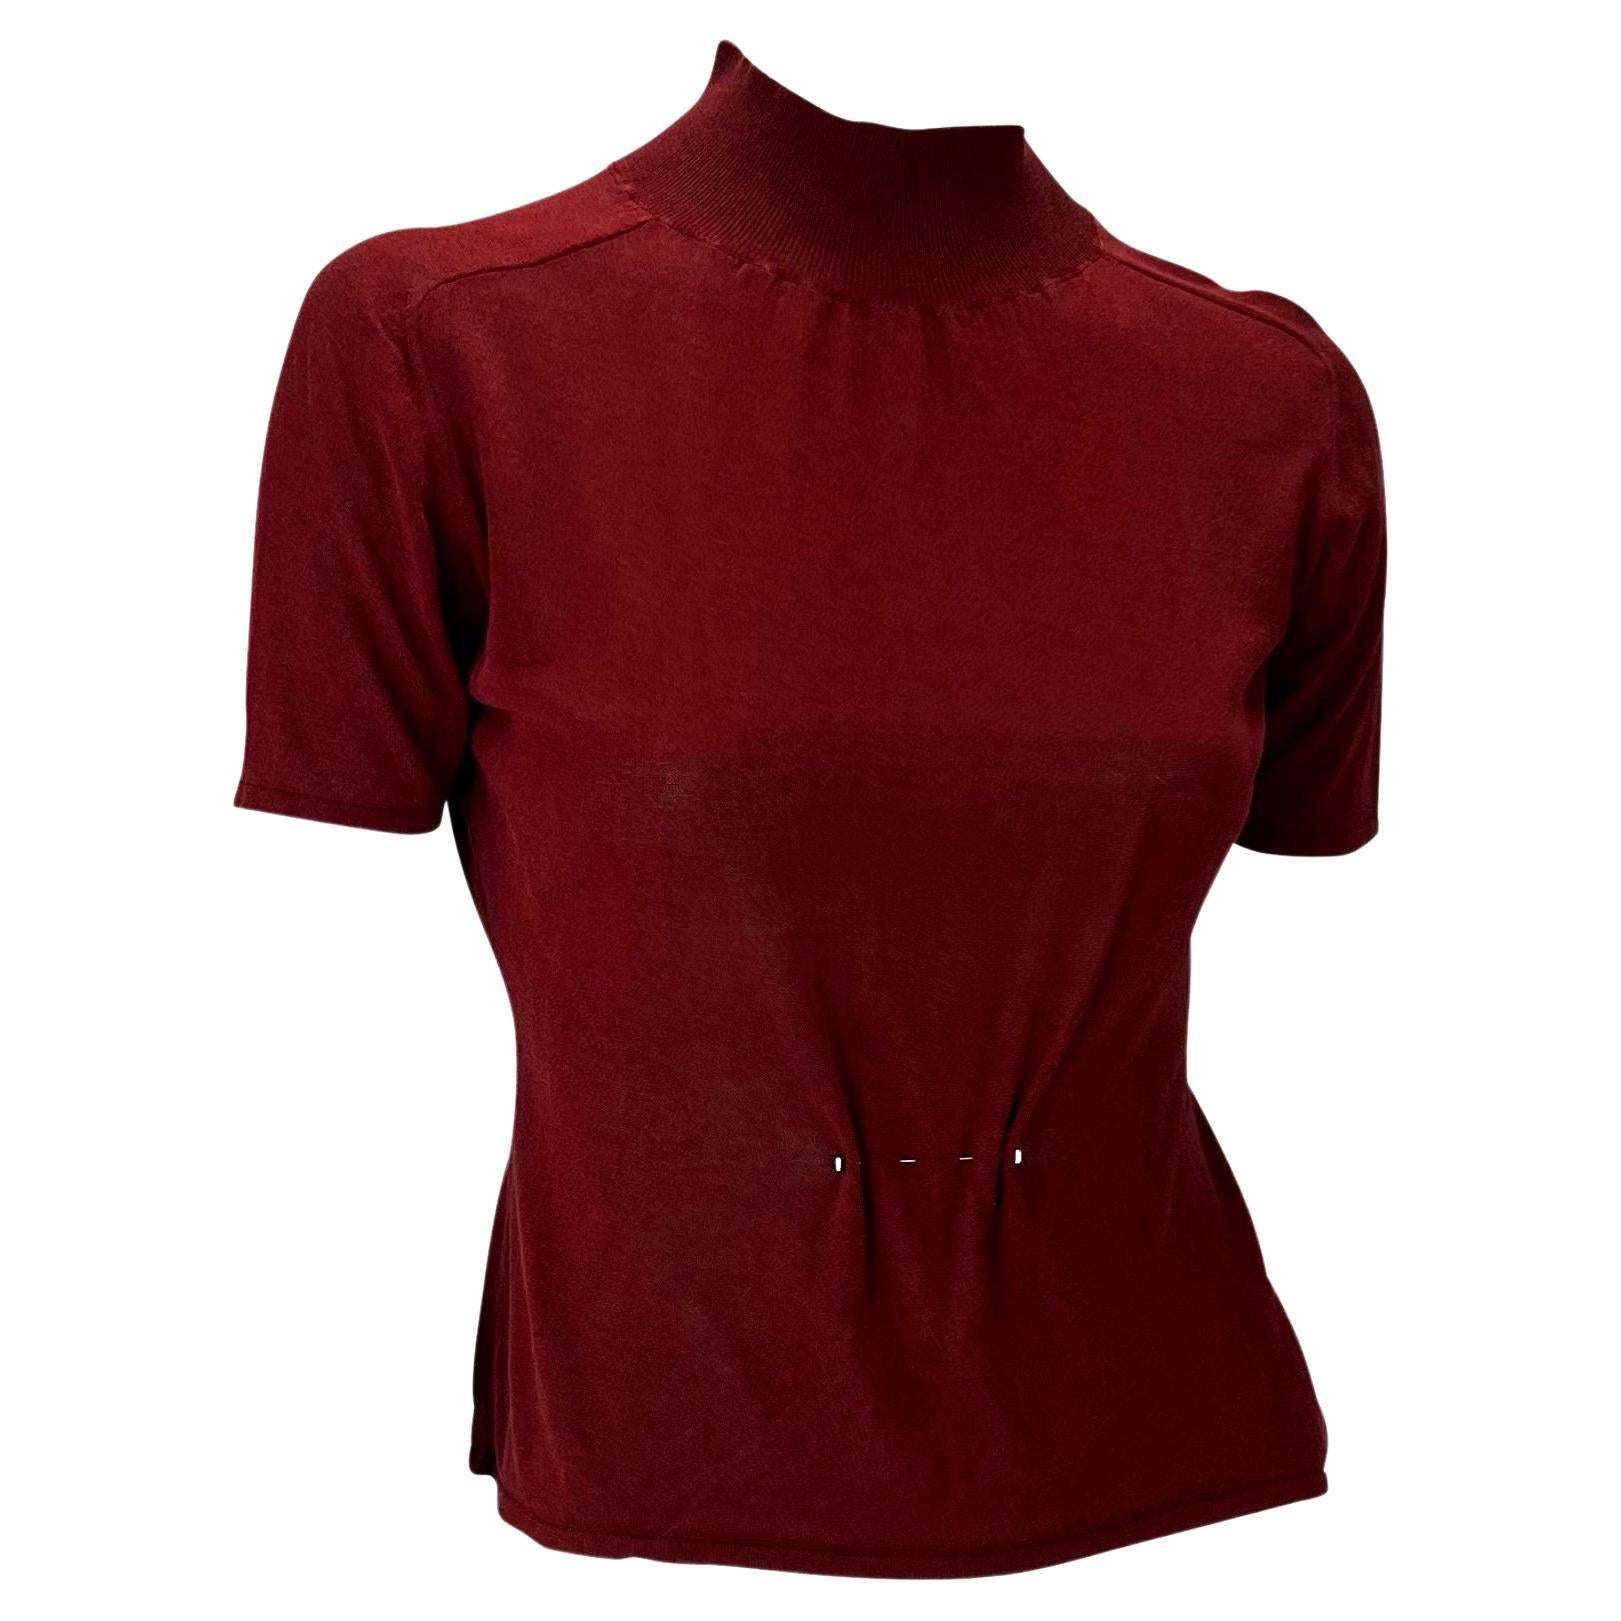 F/W 1999 Gucci by Tom Ford Runway G Pin Sheer Mock Neck Top Maroon In Good Condition For Sale In West Hollywood, CA